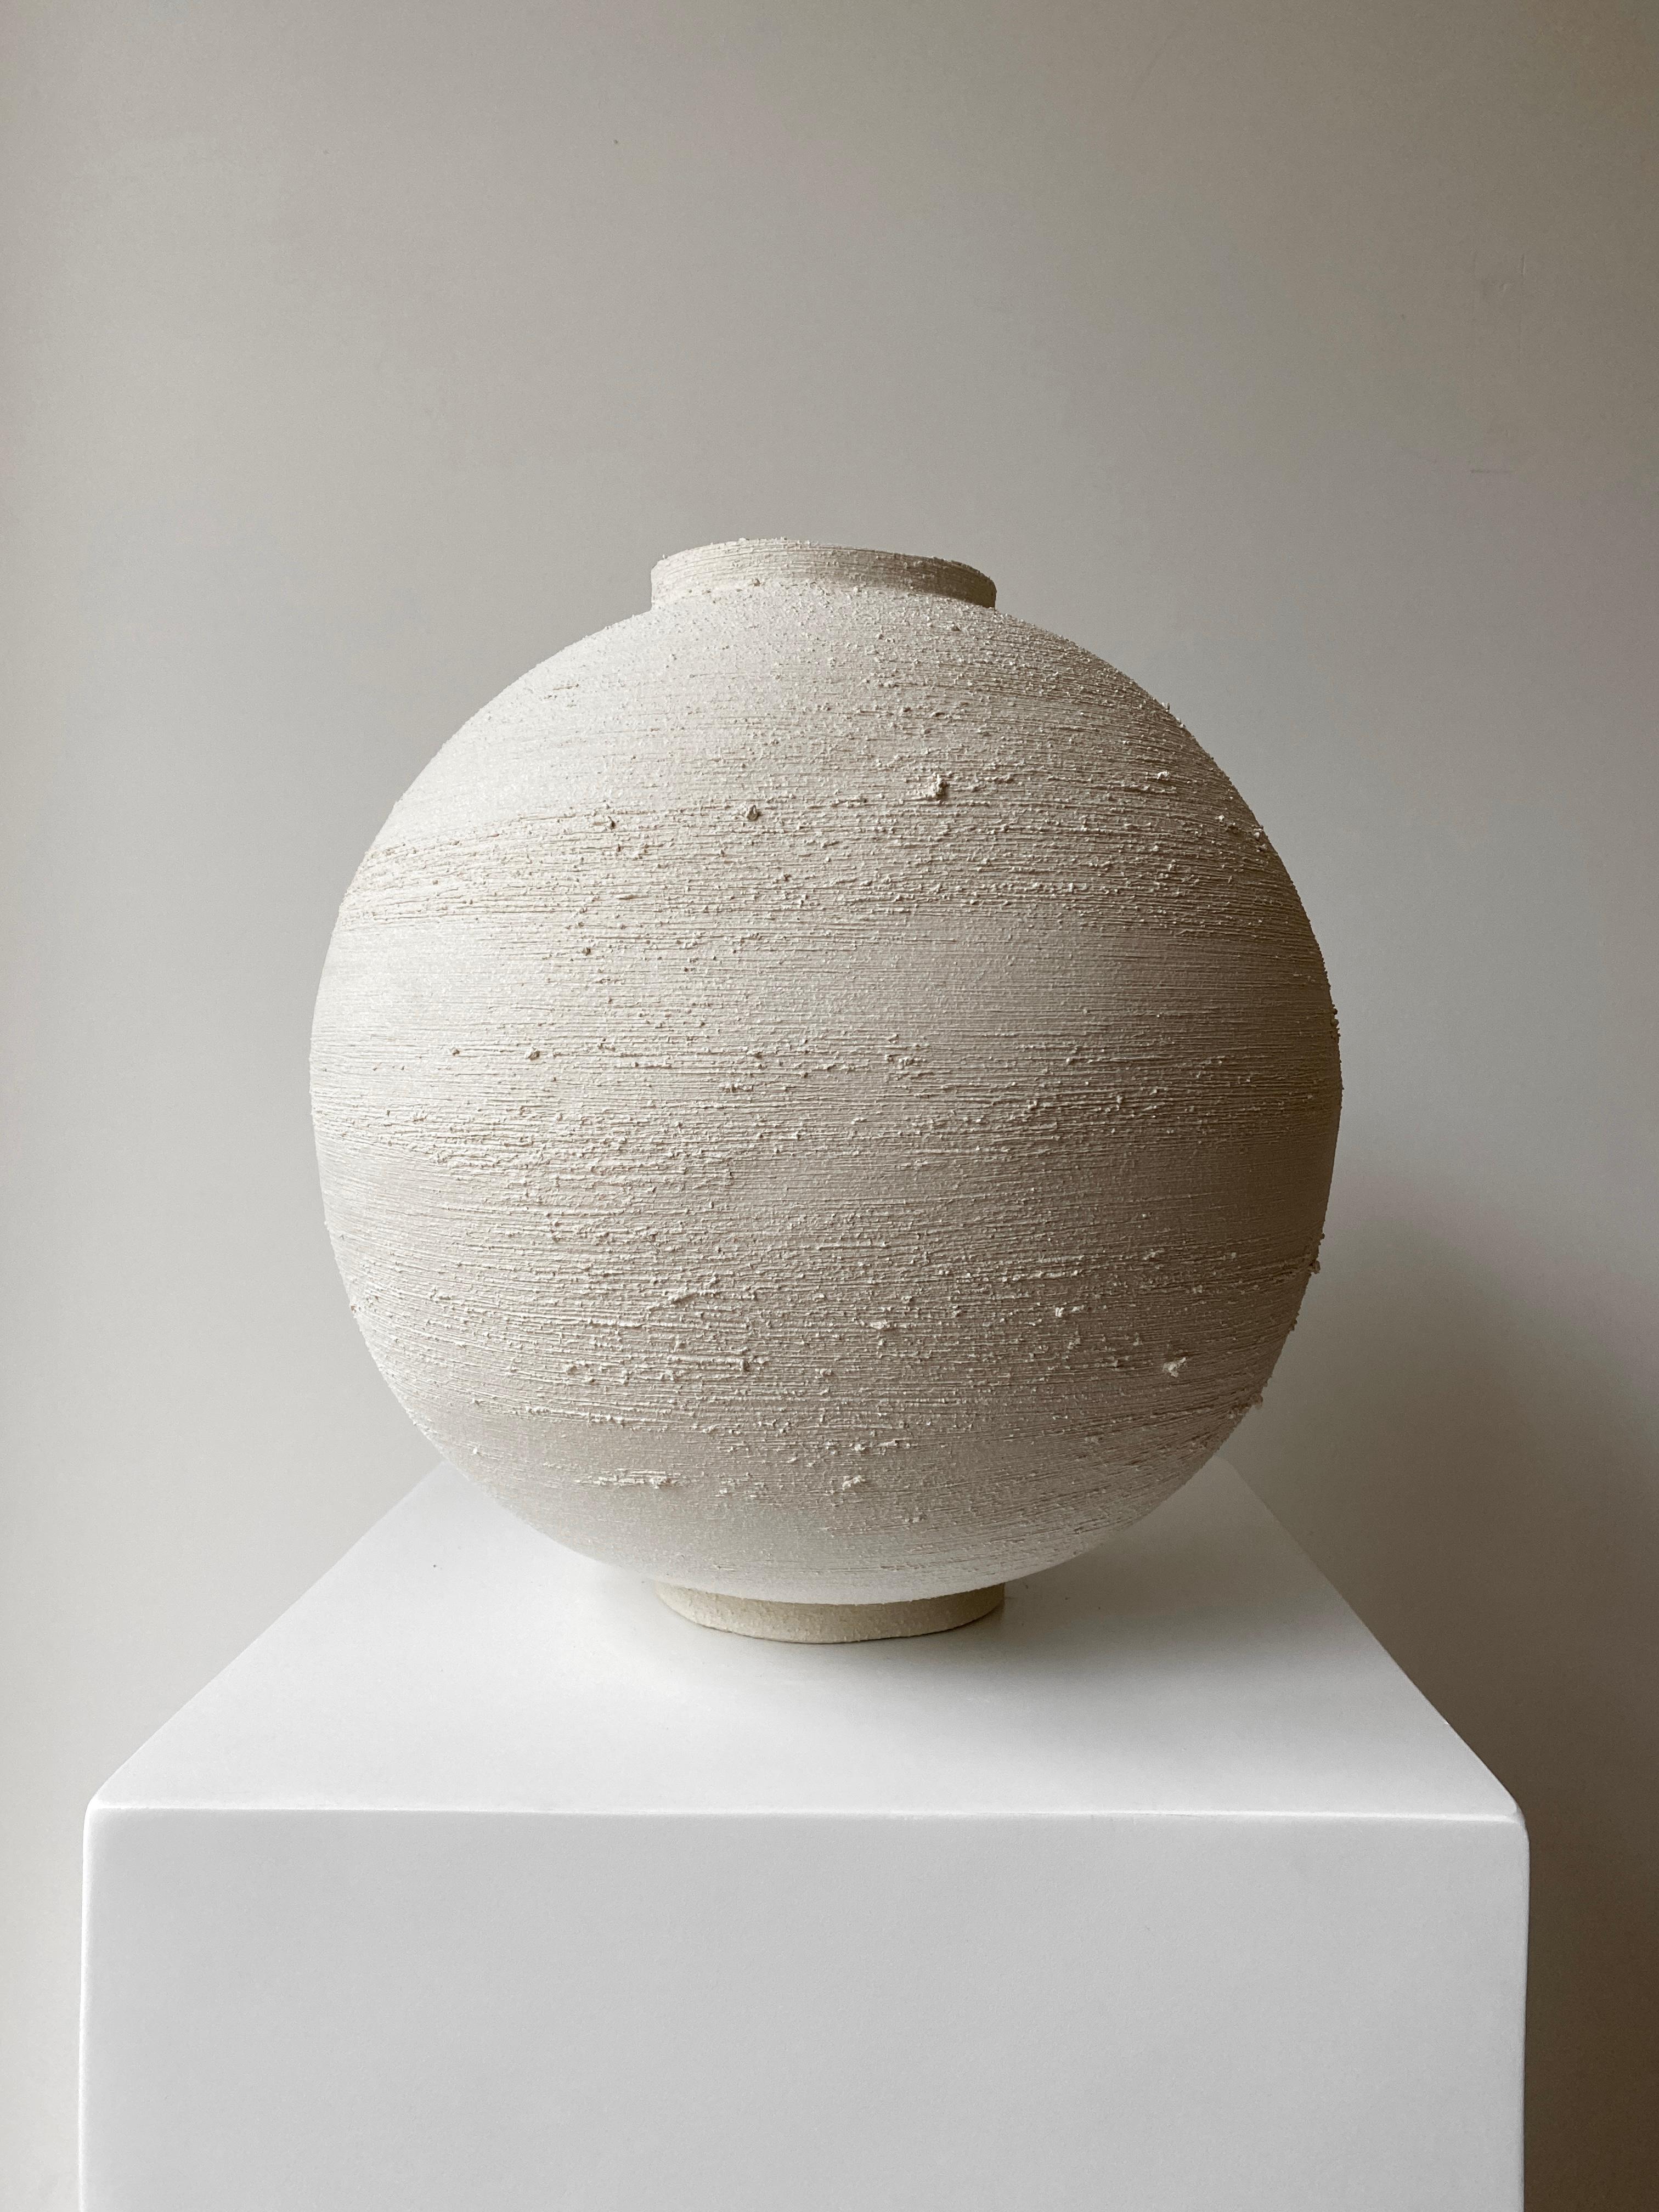 Wind Moon Jar by Laura Pasquino
Dimensions: Ø 33 x H 33 cm, opening Ø 10 cm
Materials: stoneware ceramic
Finishing: glazed matte interior, unglazed natural exterior
Colour: white 

Laura Pasquino
Incorporating references from ancient Korean